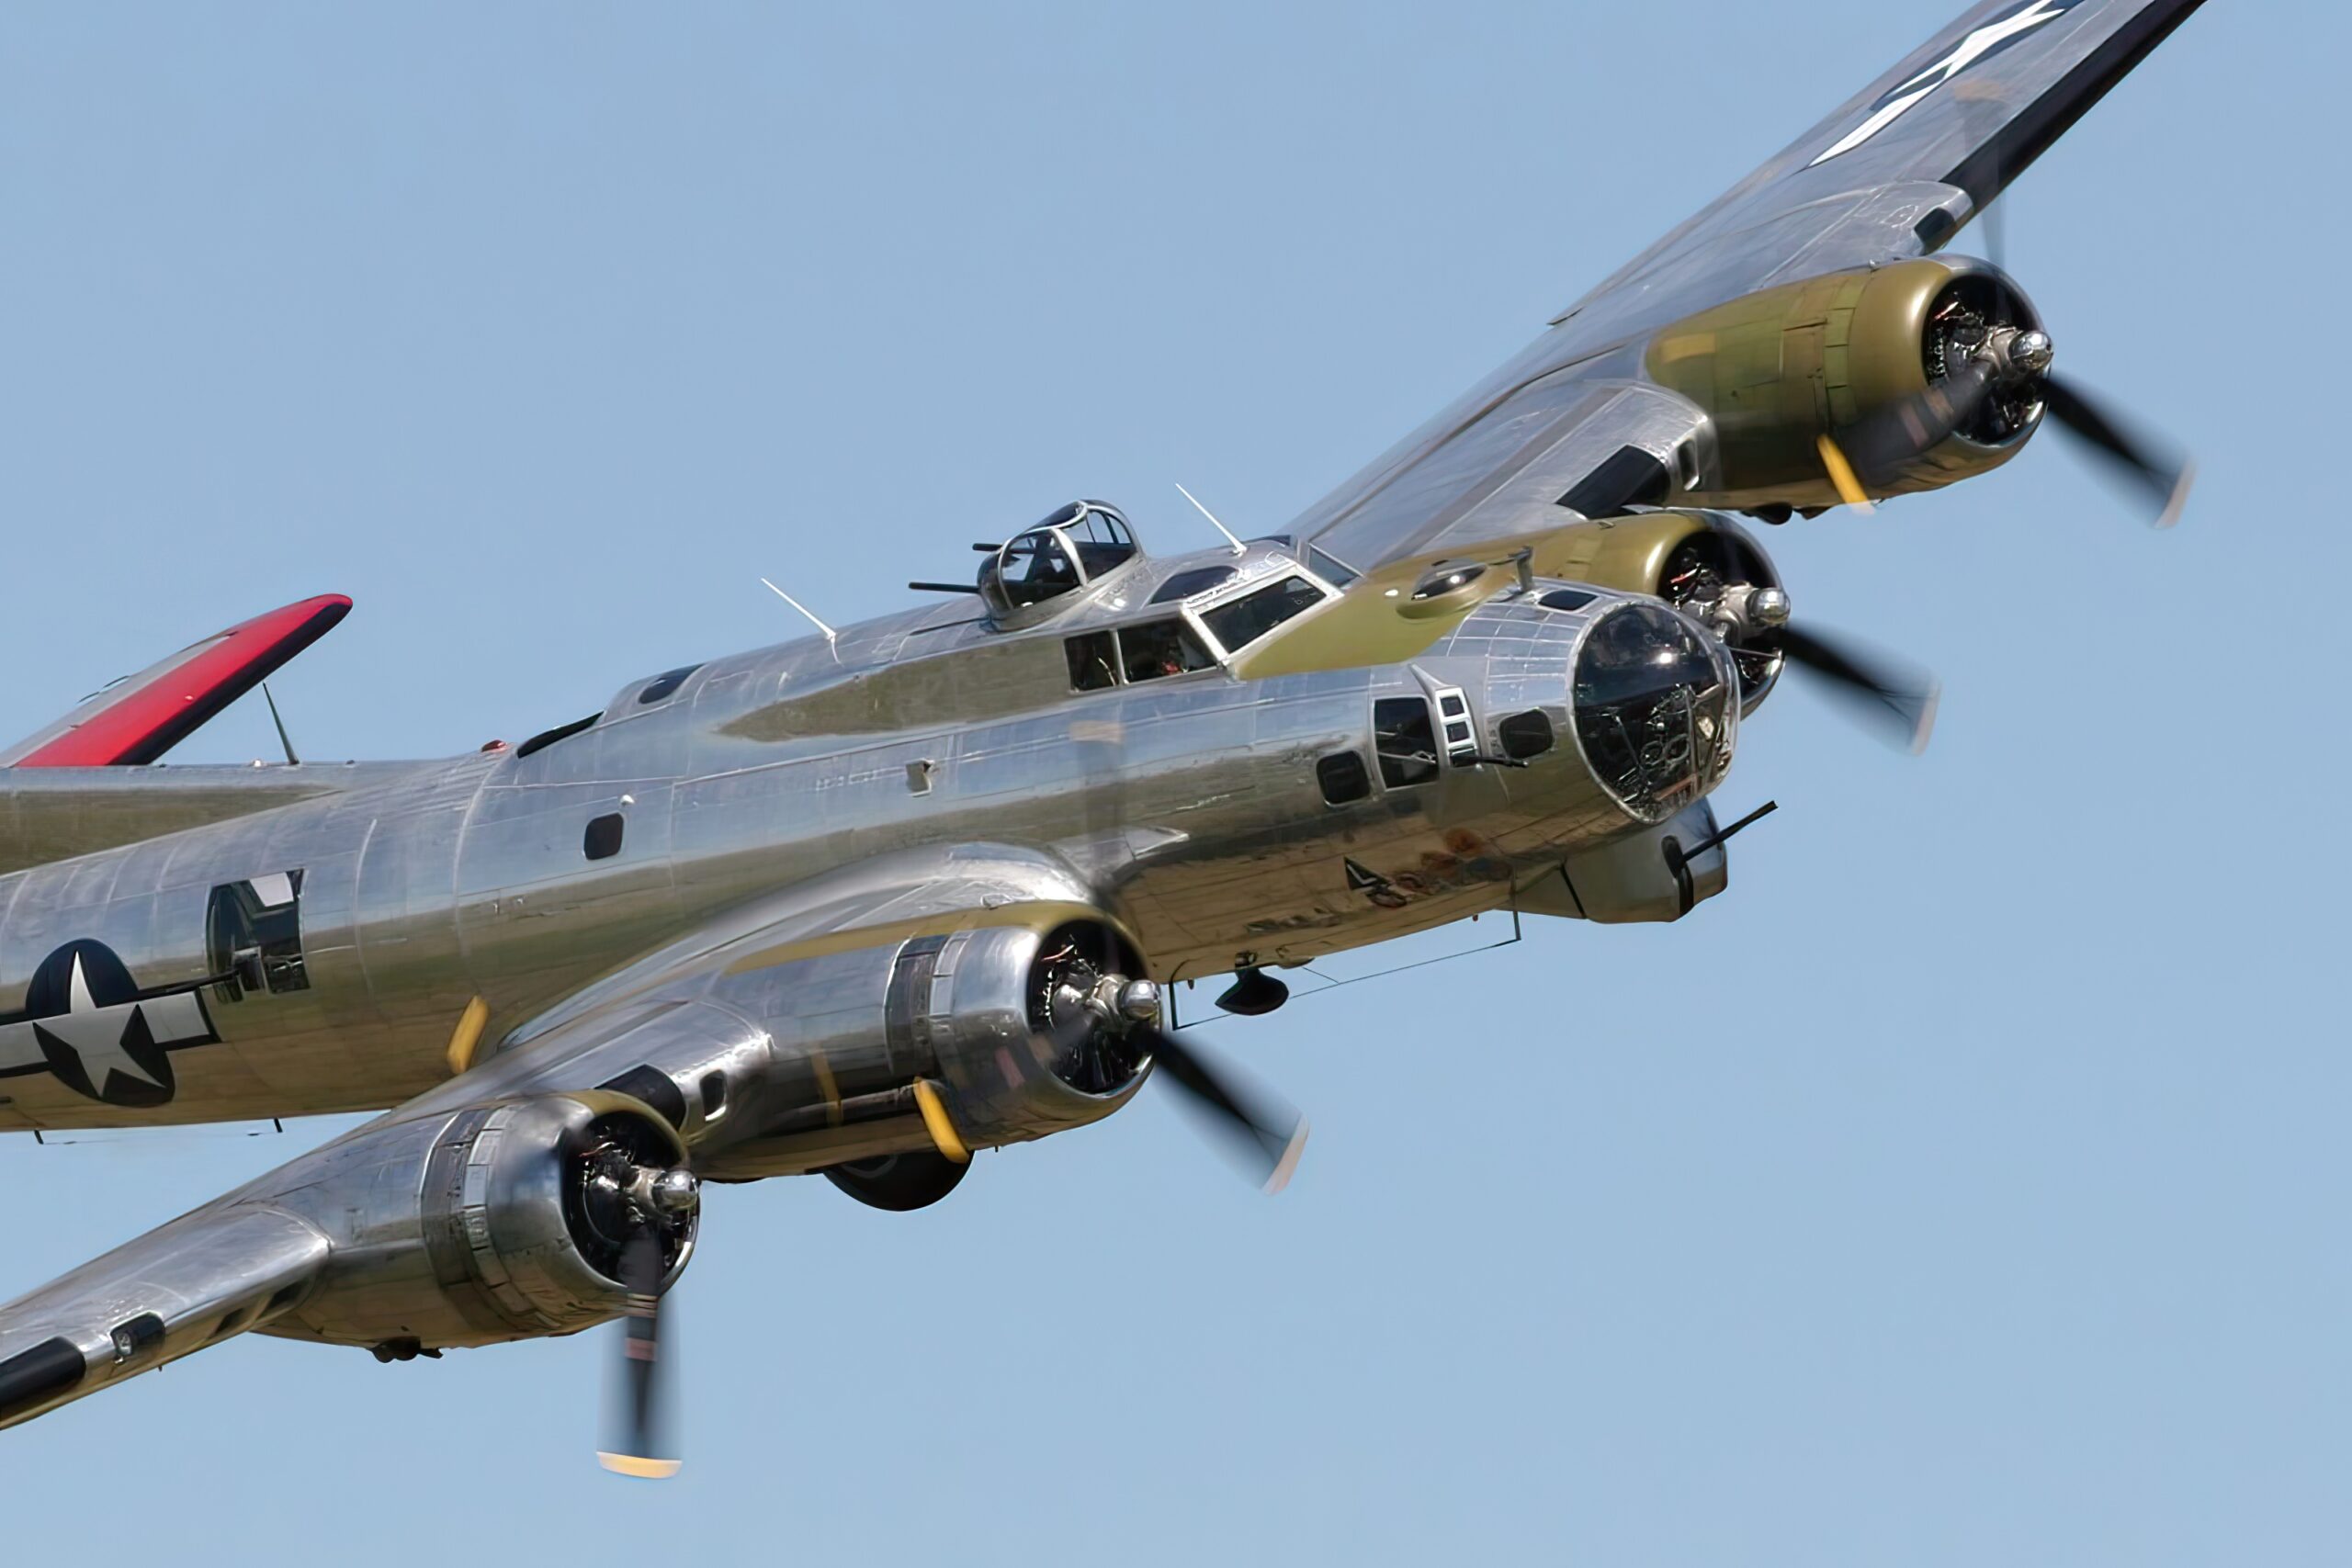 Boeing B-17G Flying Fortress “Yankee Lady”